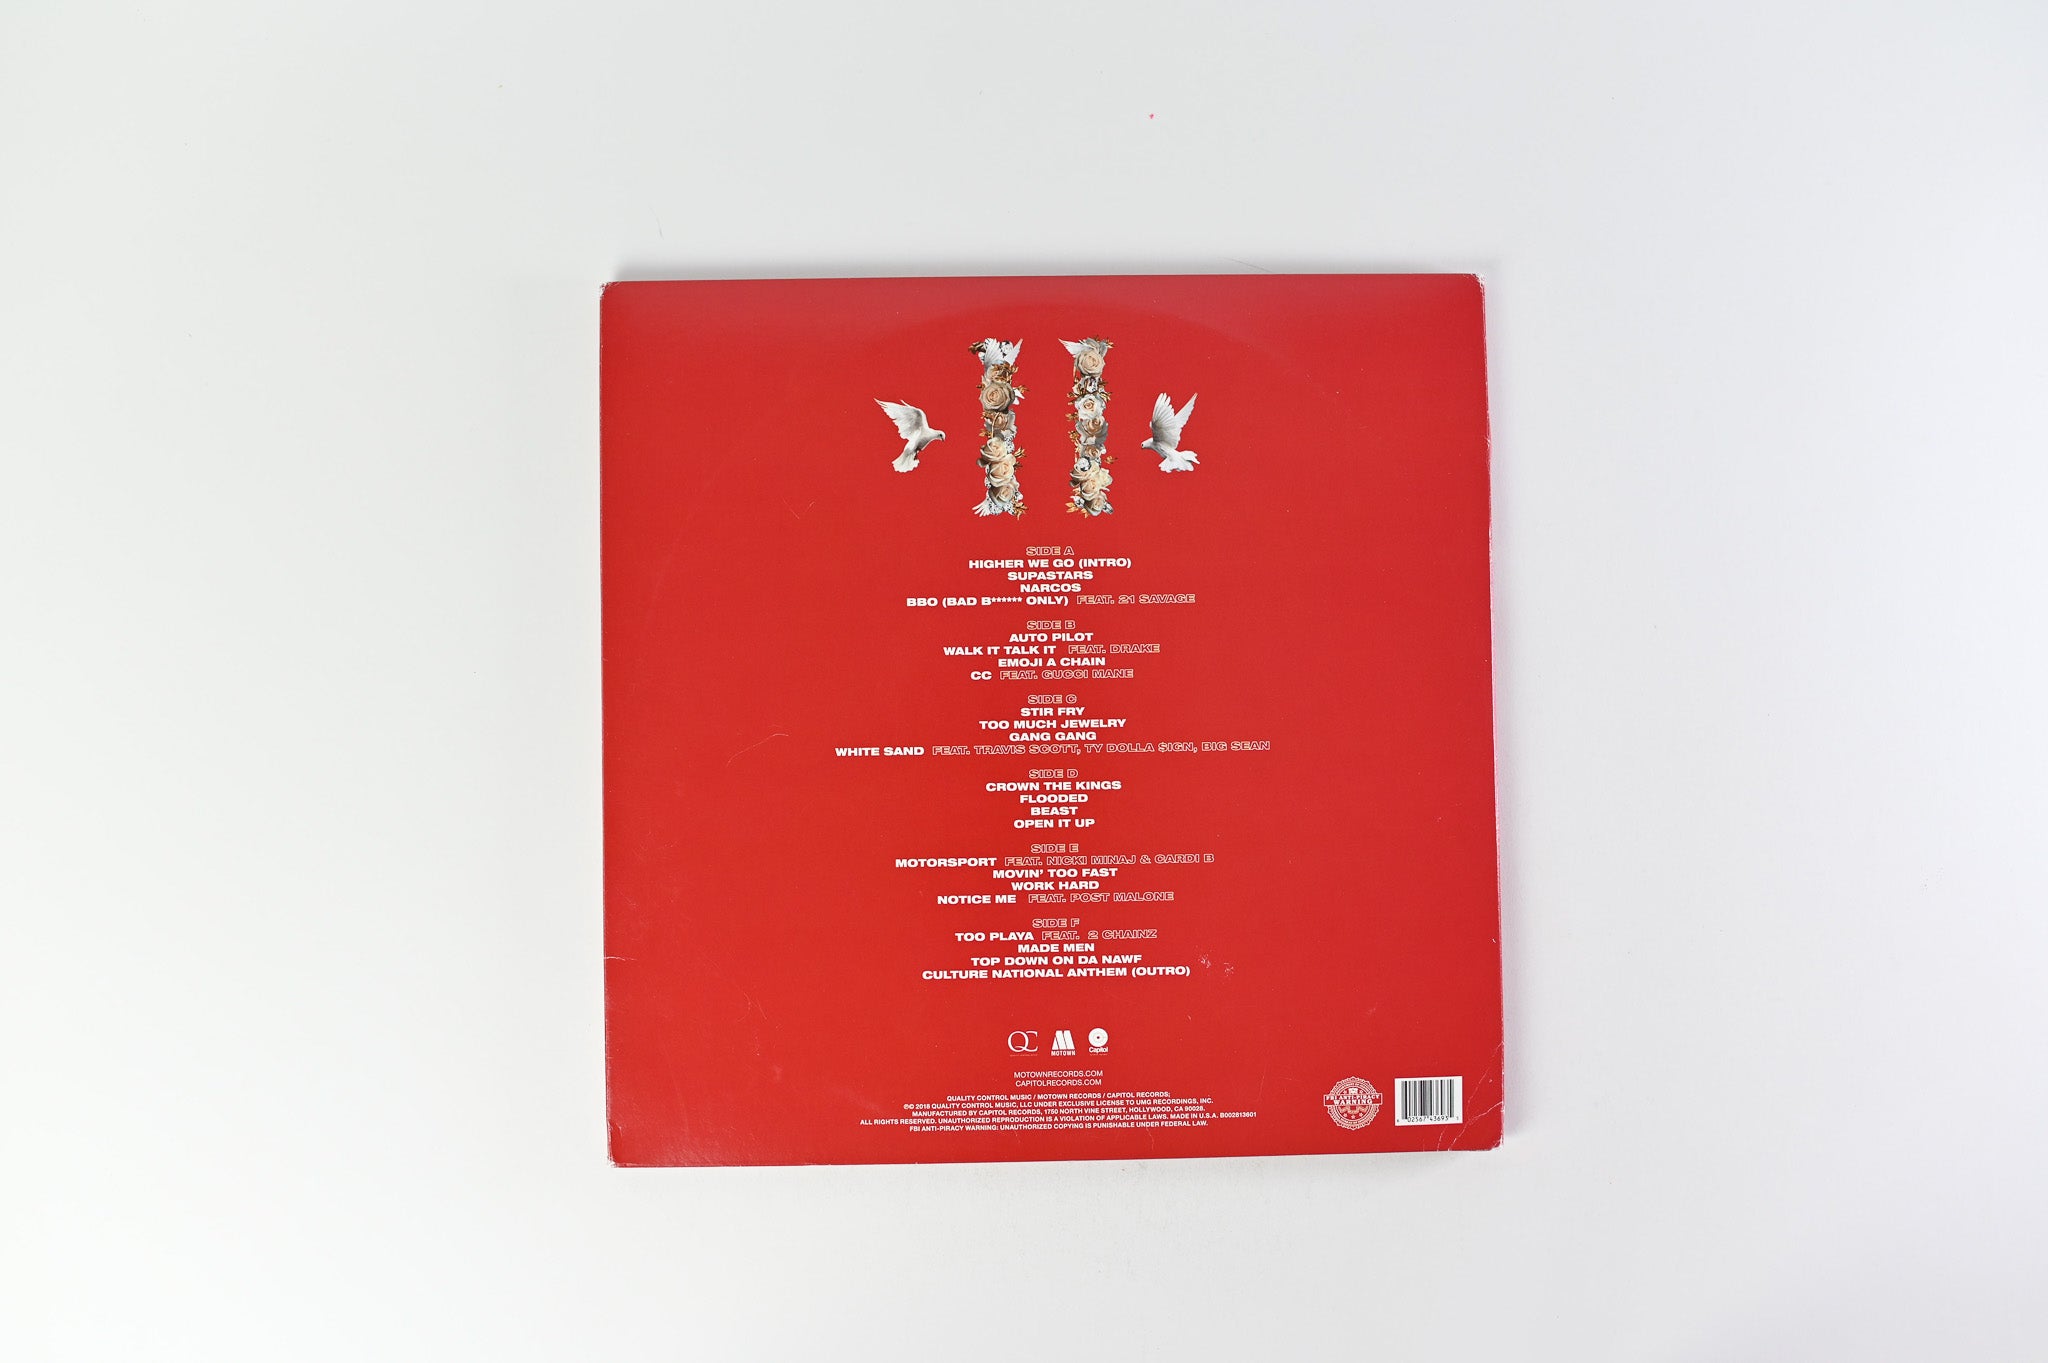 Migos - Culture II on Capitol Tri-Fold Red Vinyl